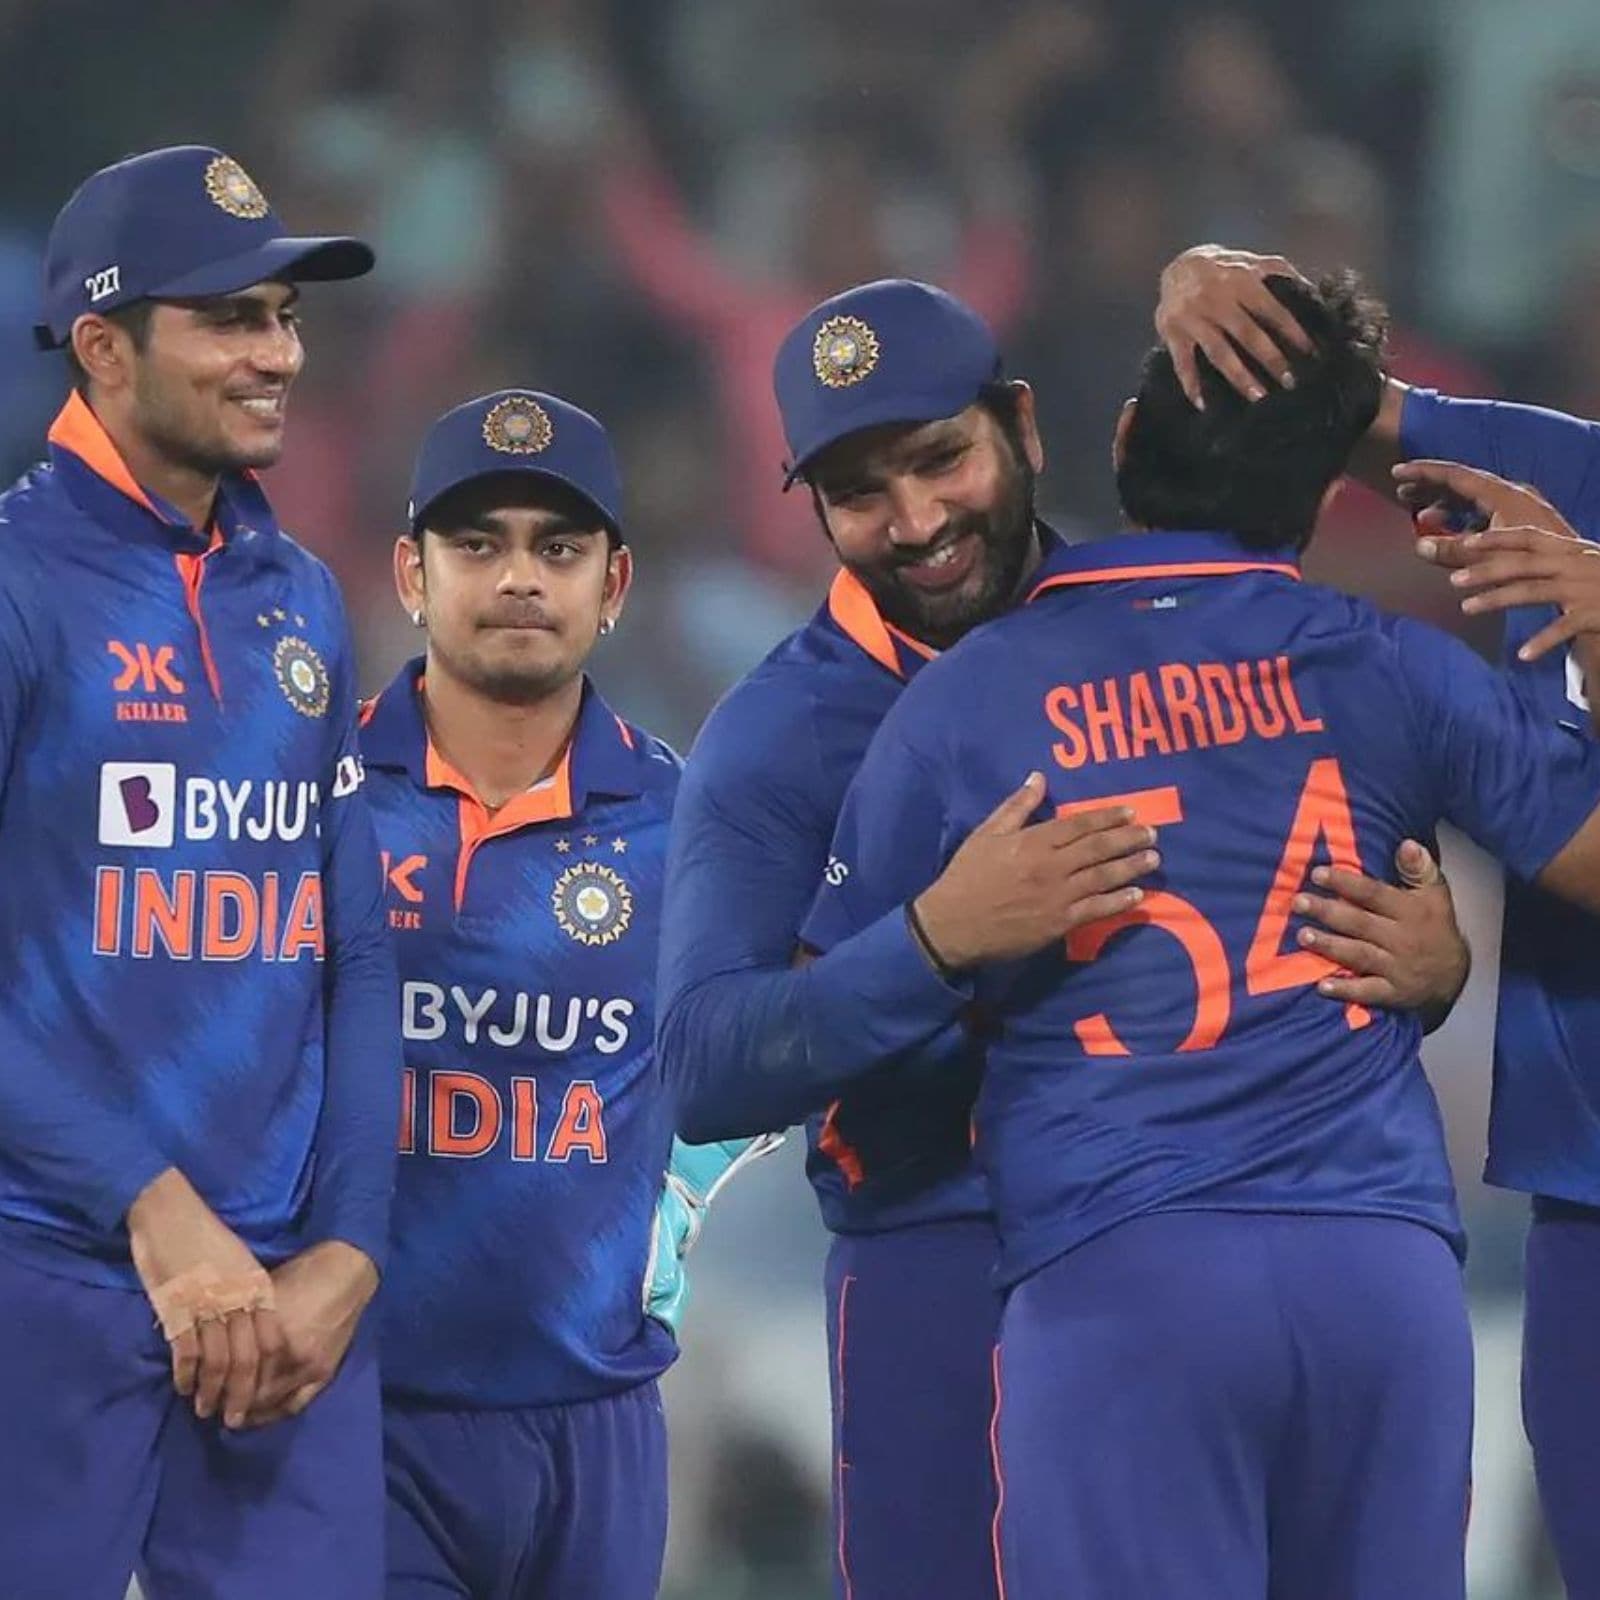 India vs New Zealand 2nd ODI Live Streaming When and Where to Watch Live Coverage on Live TV and Online